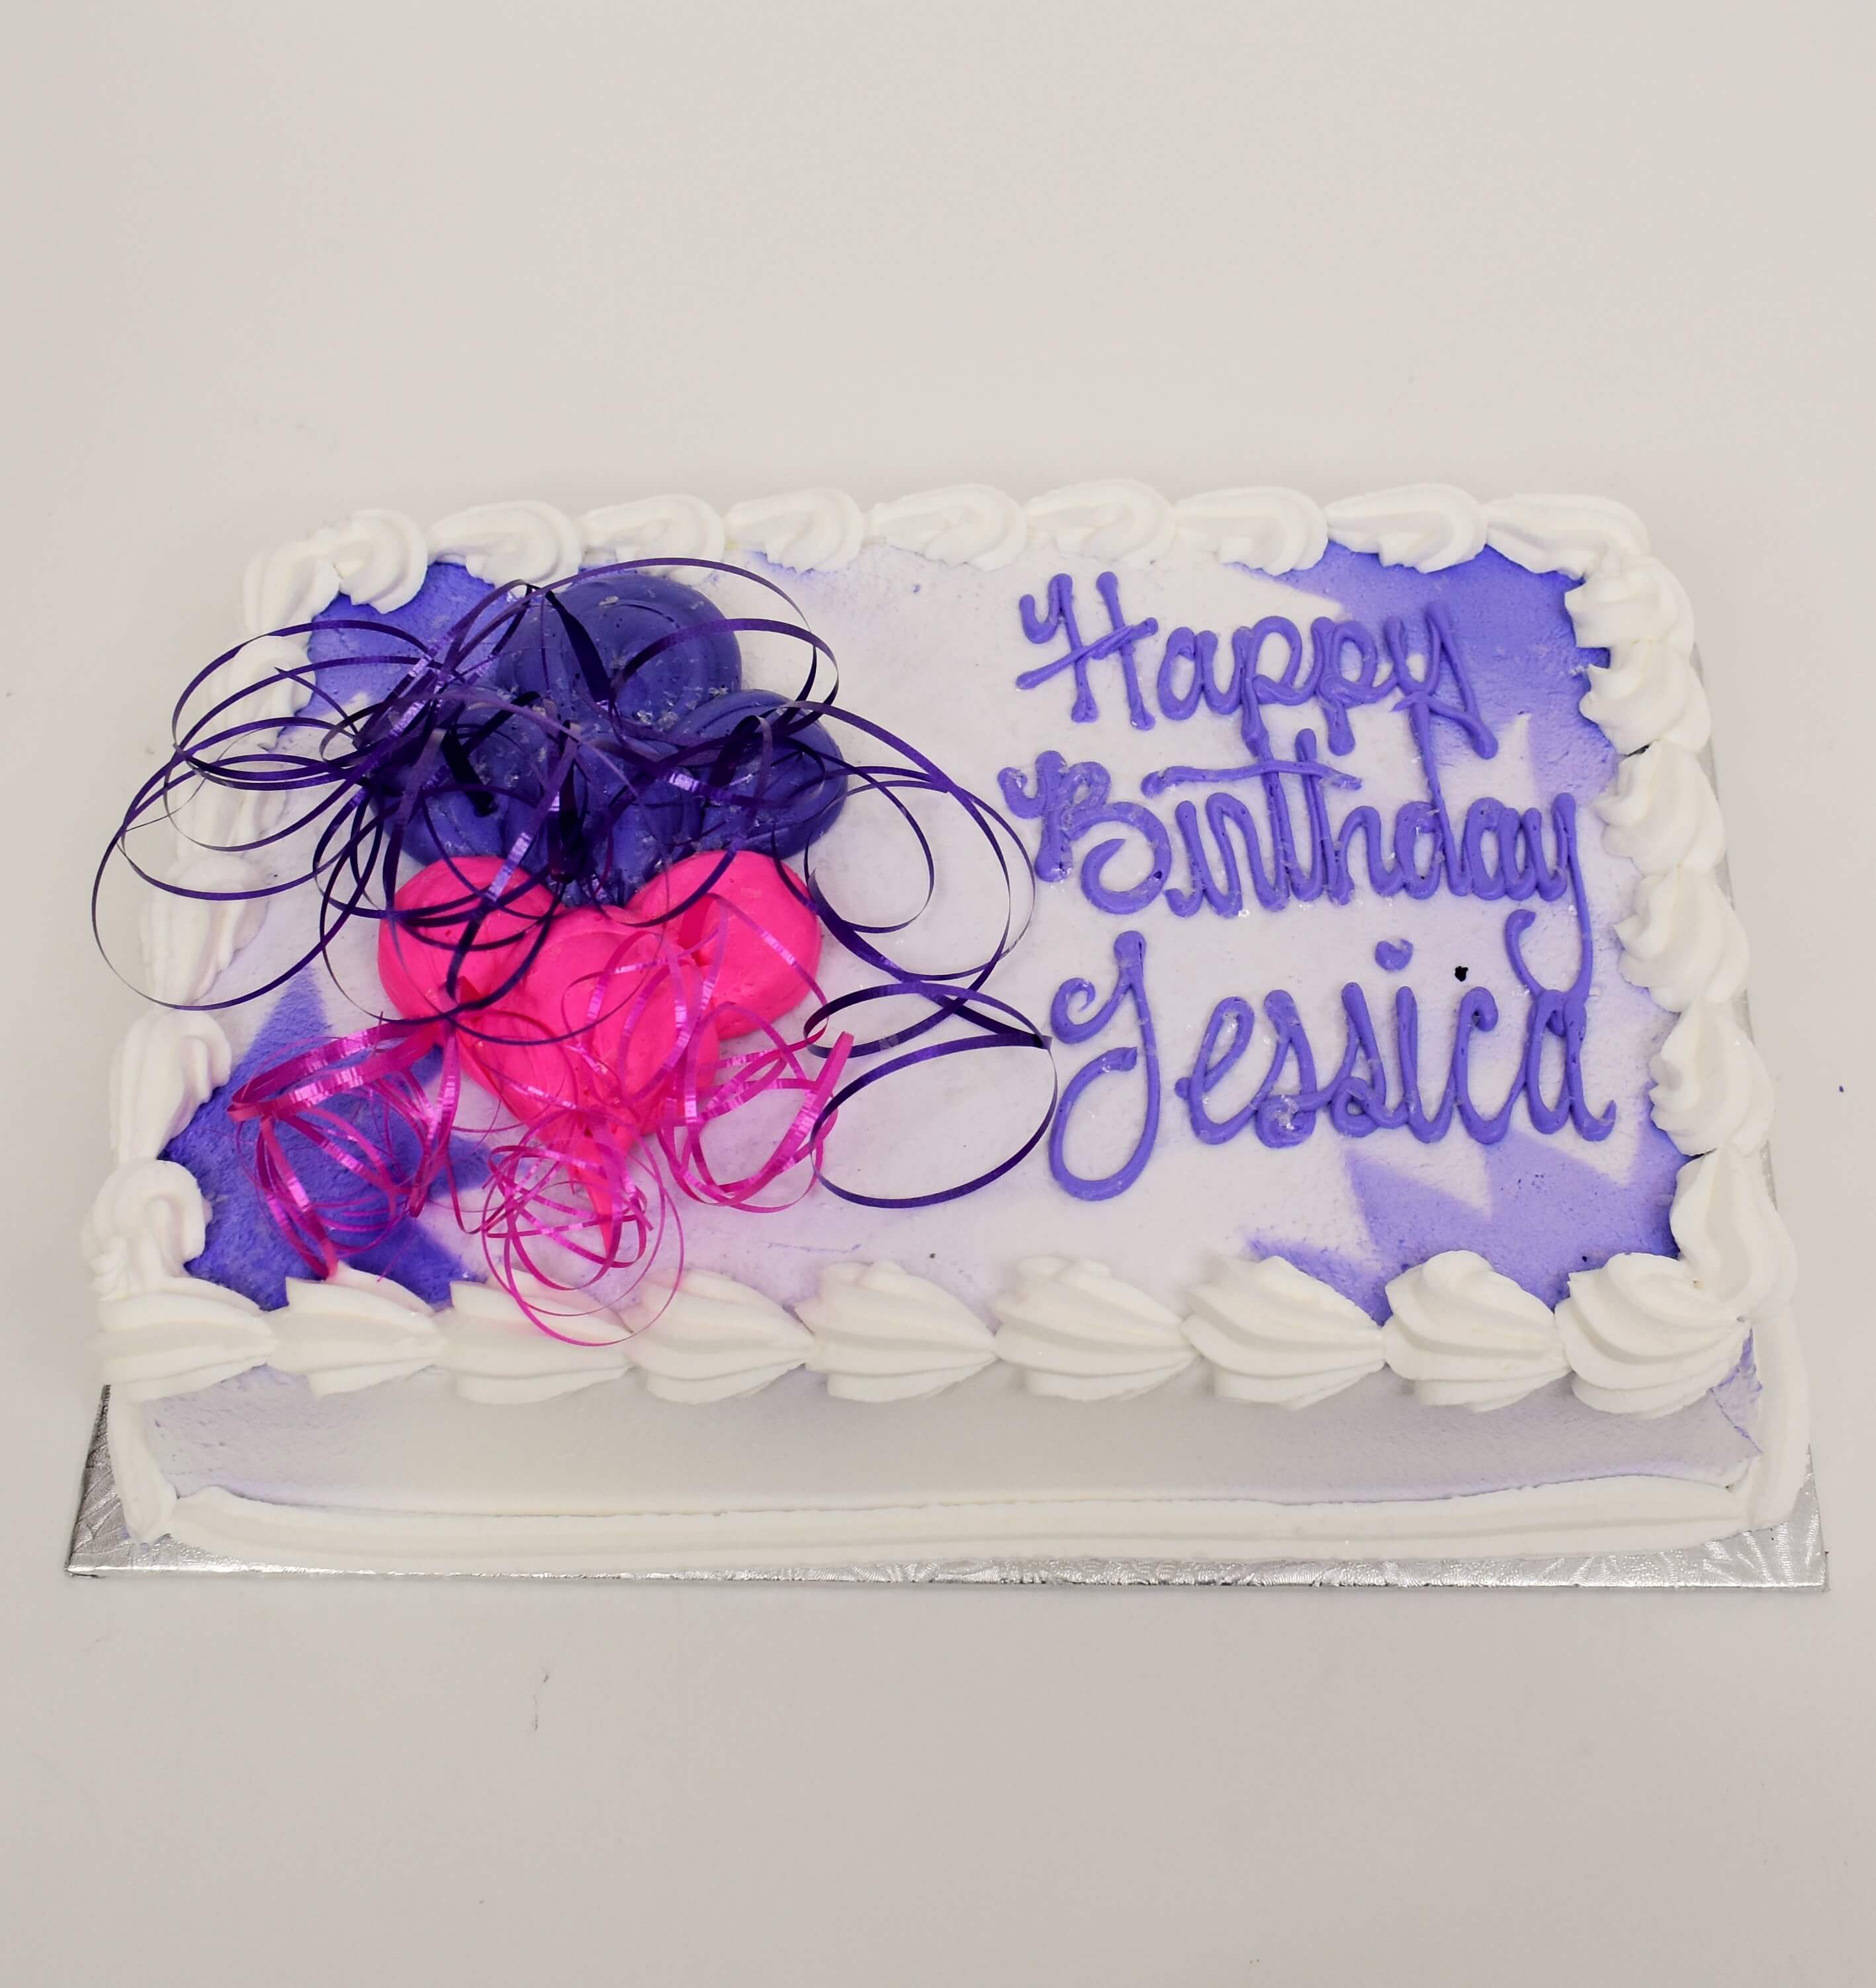 McArthur's Bakery Custom Cake With Vibrant Purple And Pink Balloons